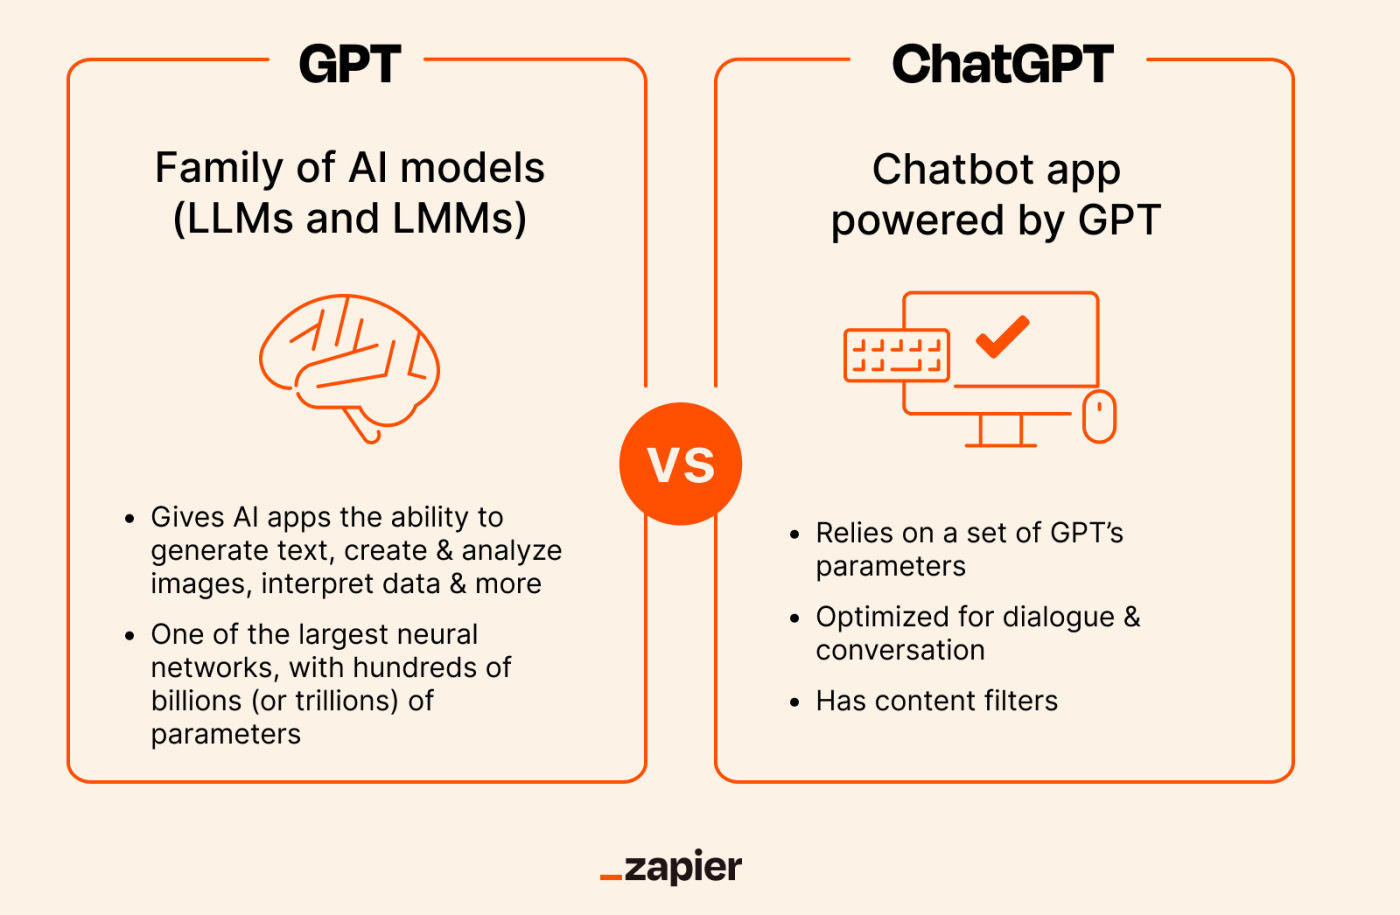 An infographic showing the differences between ChatGPT and GPT